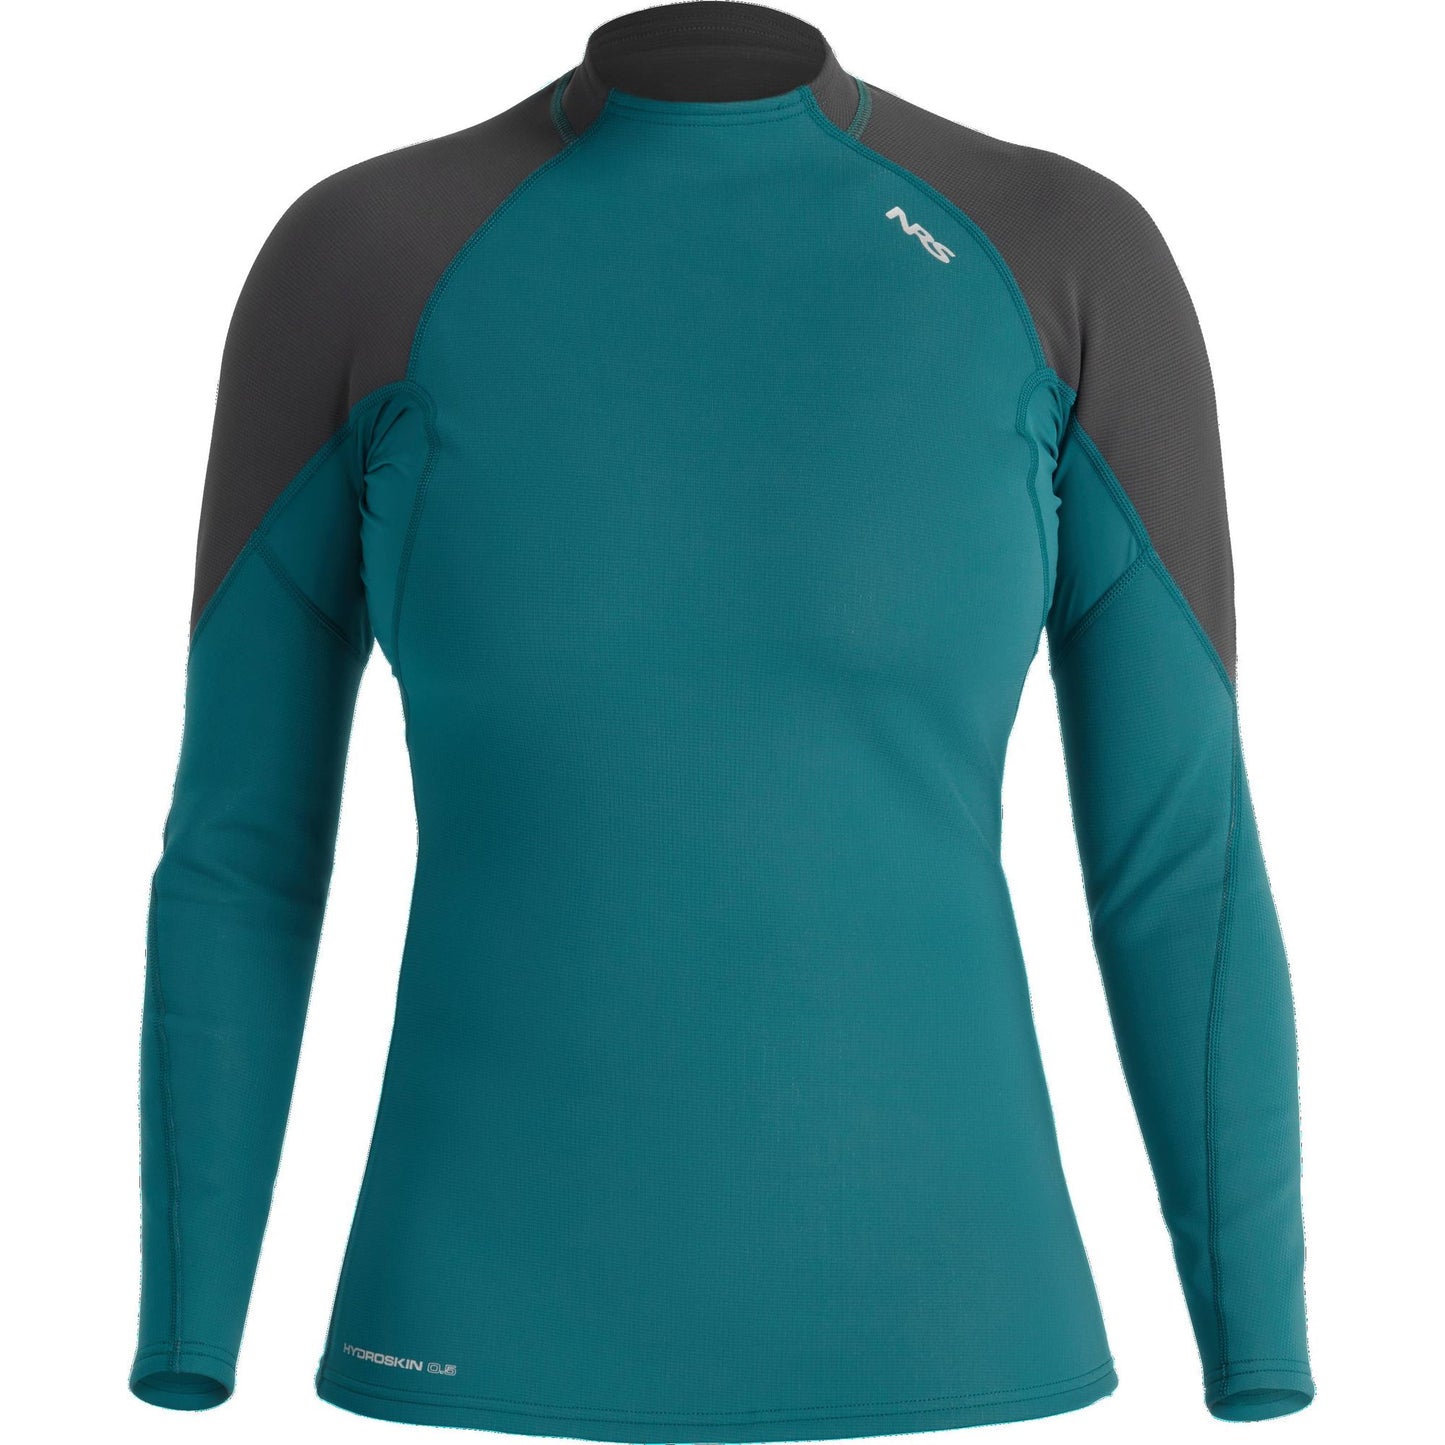 A teal and black NRS Hydroskin 0.5 Long Sleeve Shirt - Women's, a layering arsenal insulating top.